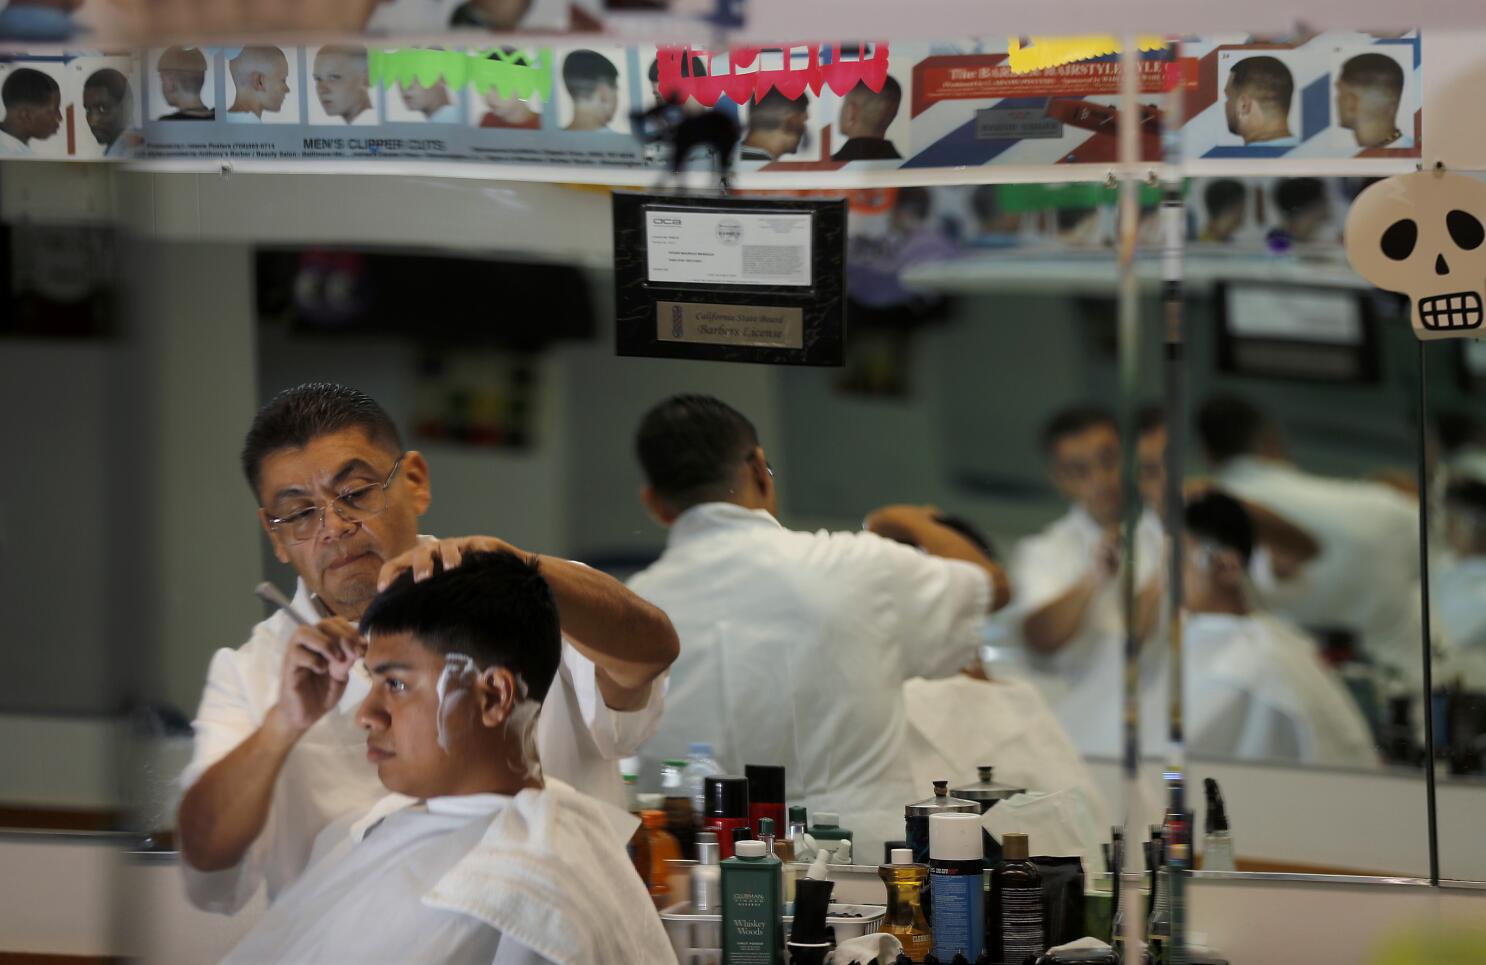 Need a Close Shave? Here's the Top 5 Barbershops Off The Strip in Las Vegas